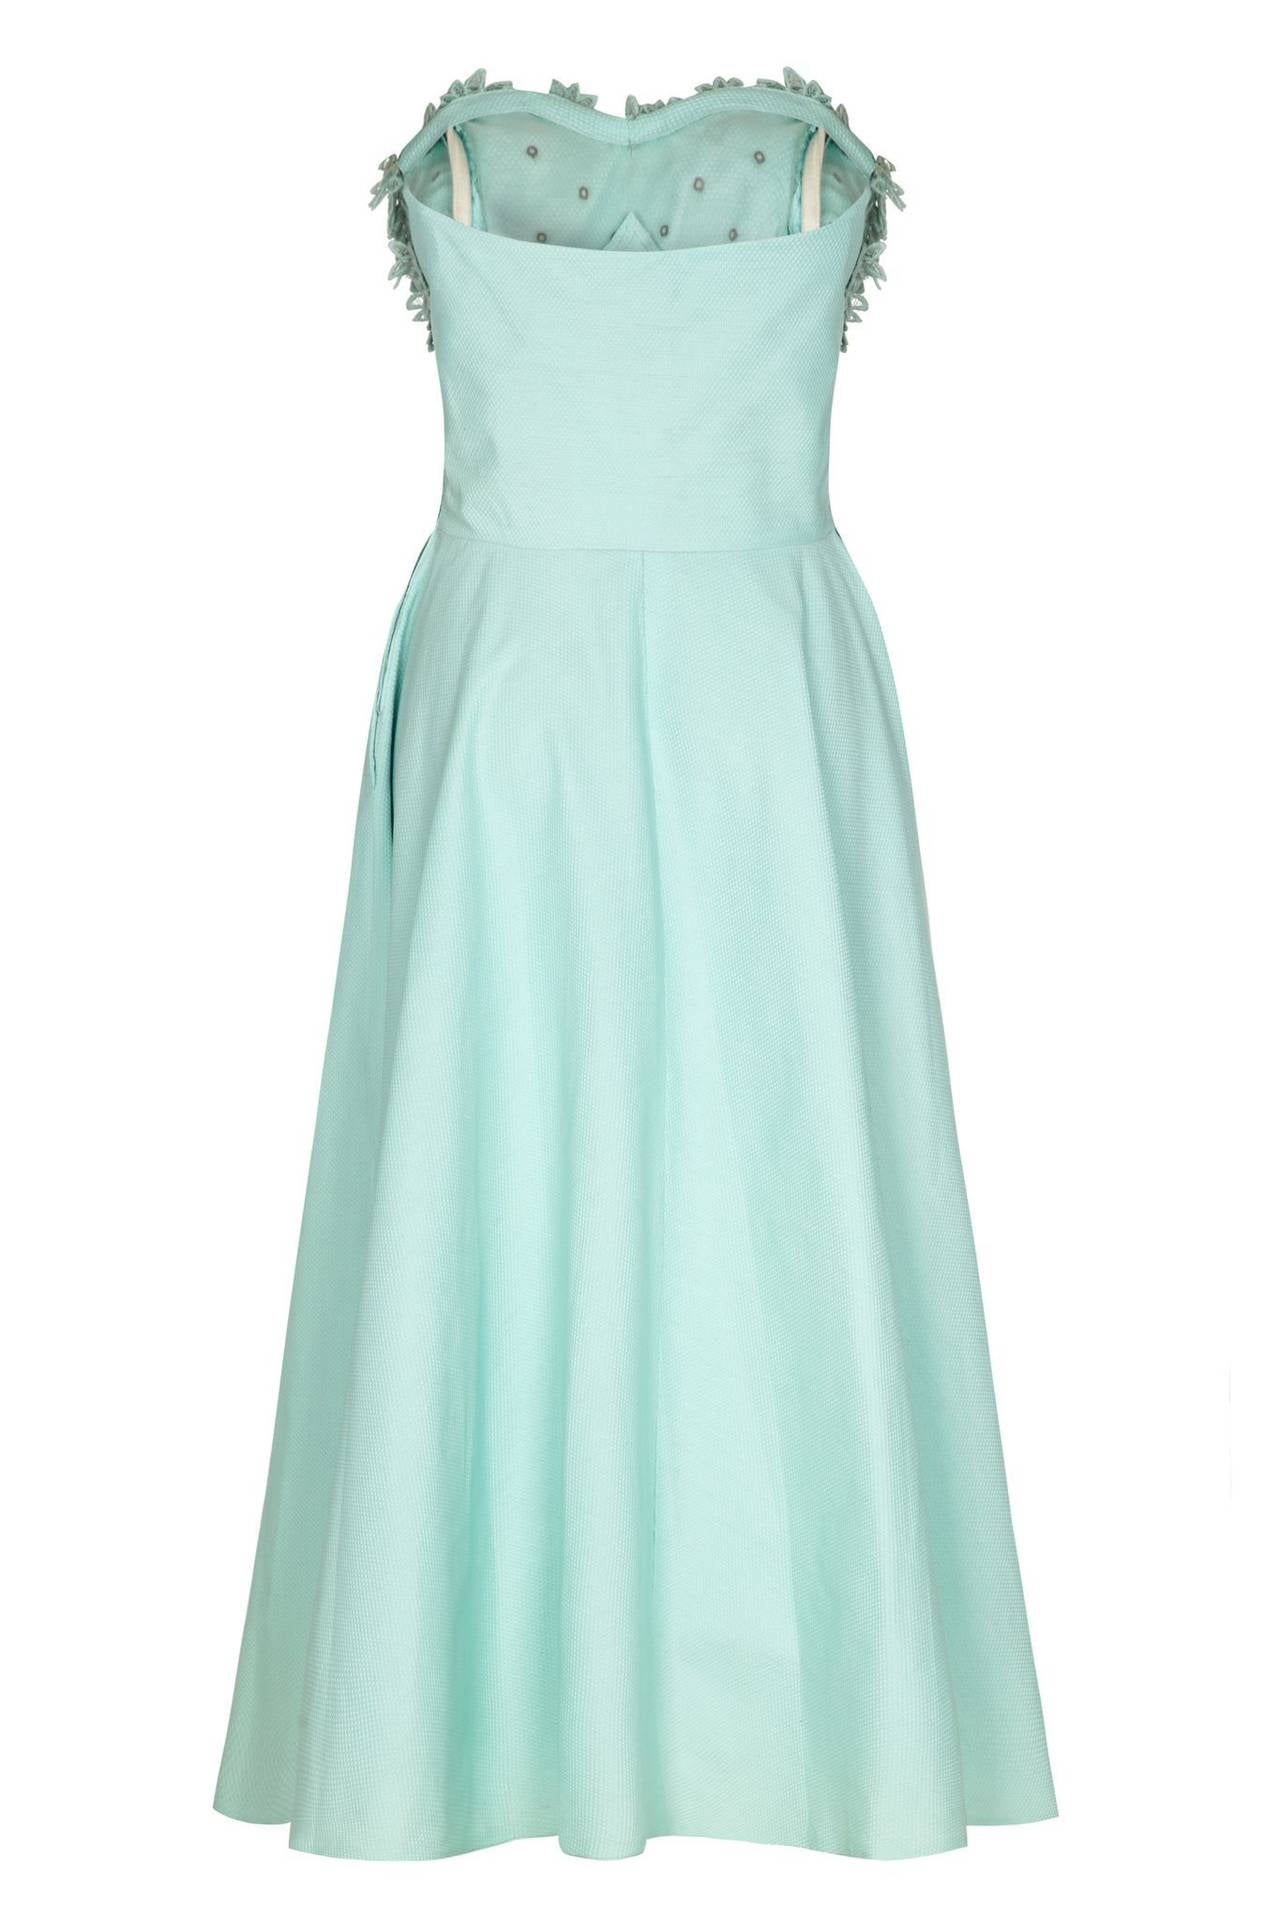 This enchanting late 1950s American prom style strapless dress in soft aquamarine textured cotton has a classic feminine aesthetic and is beautifully constructed to showcase an hourglass silhouette. The bodice has a sweetheart neckline and features